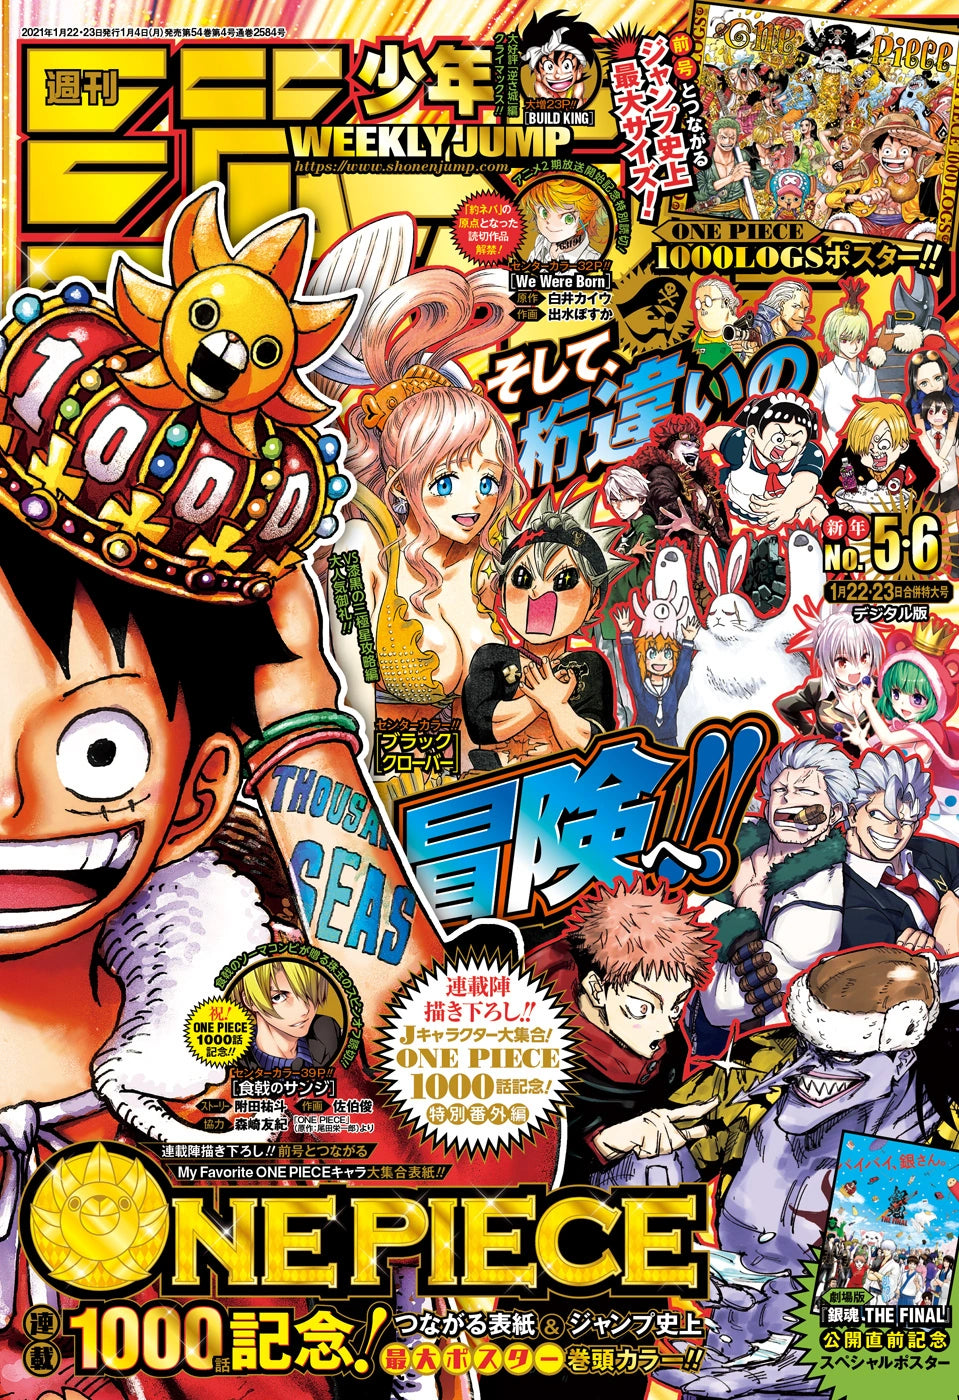 WEEKLY SHONEN JUMP 5-6-2021 ONE PIECE COVER